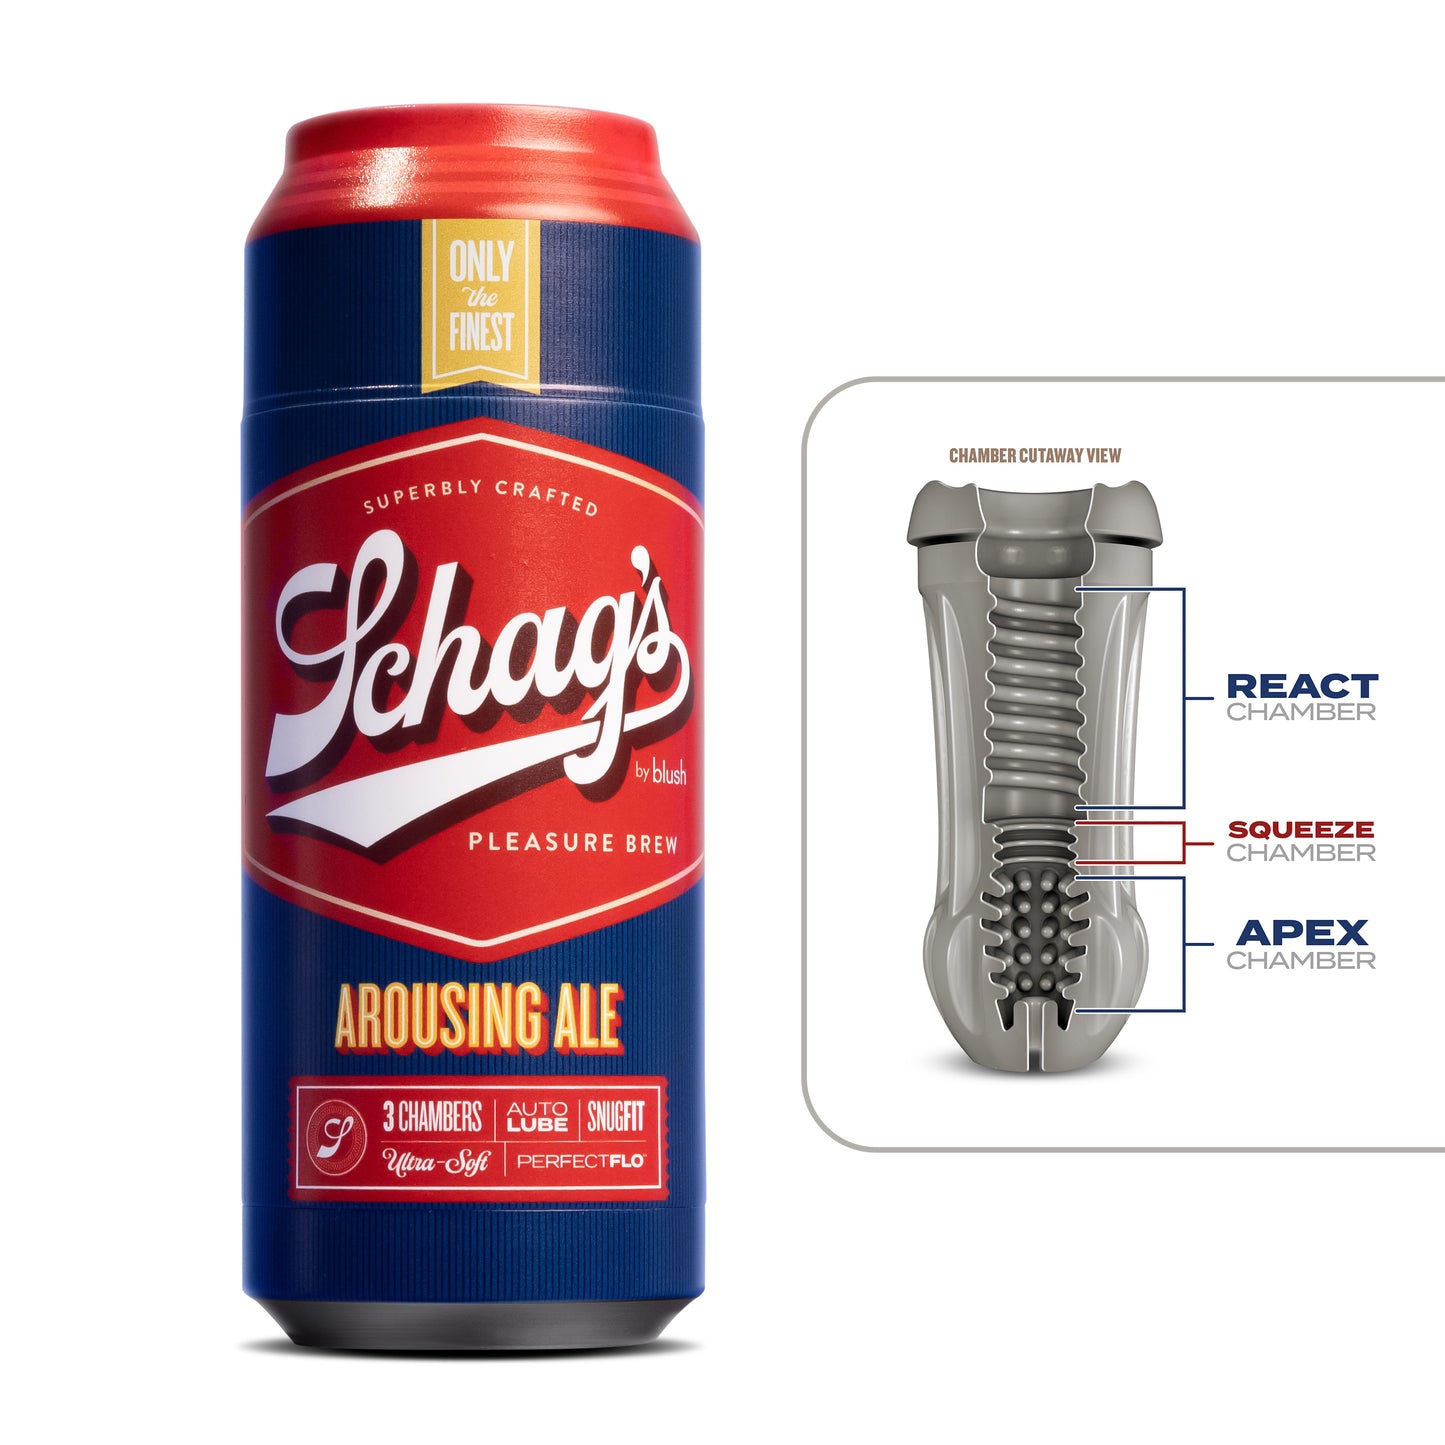 Schag's - Aurousing Ale - Frosted